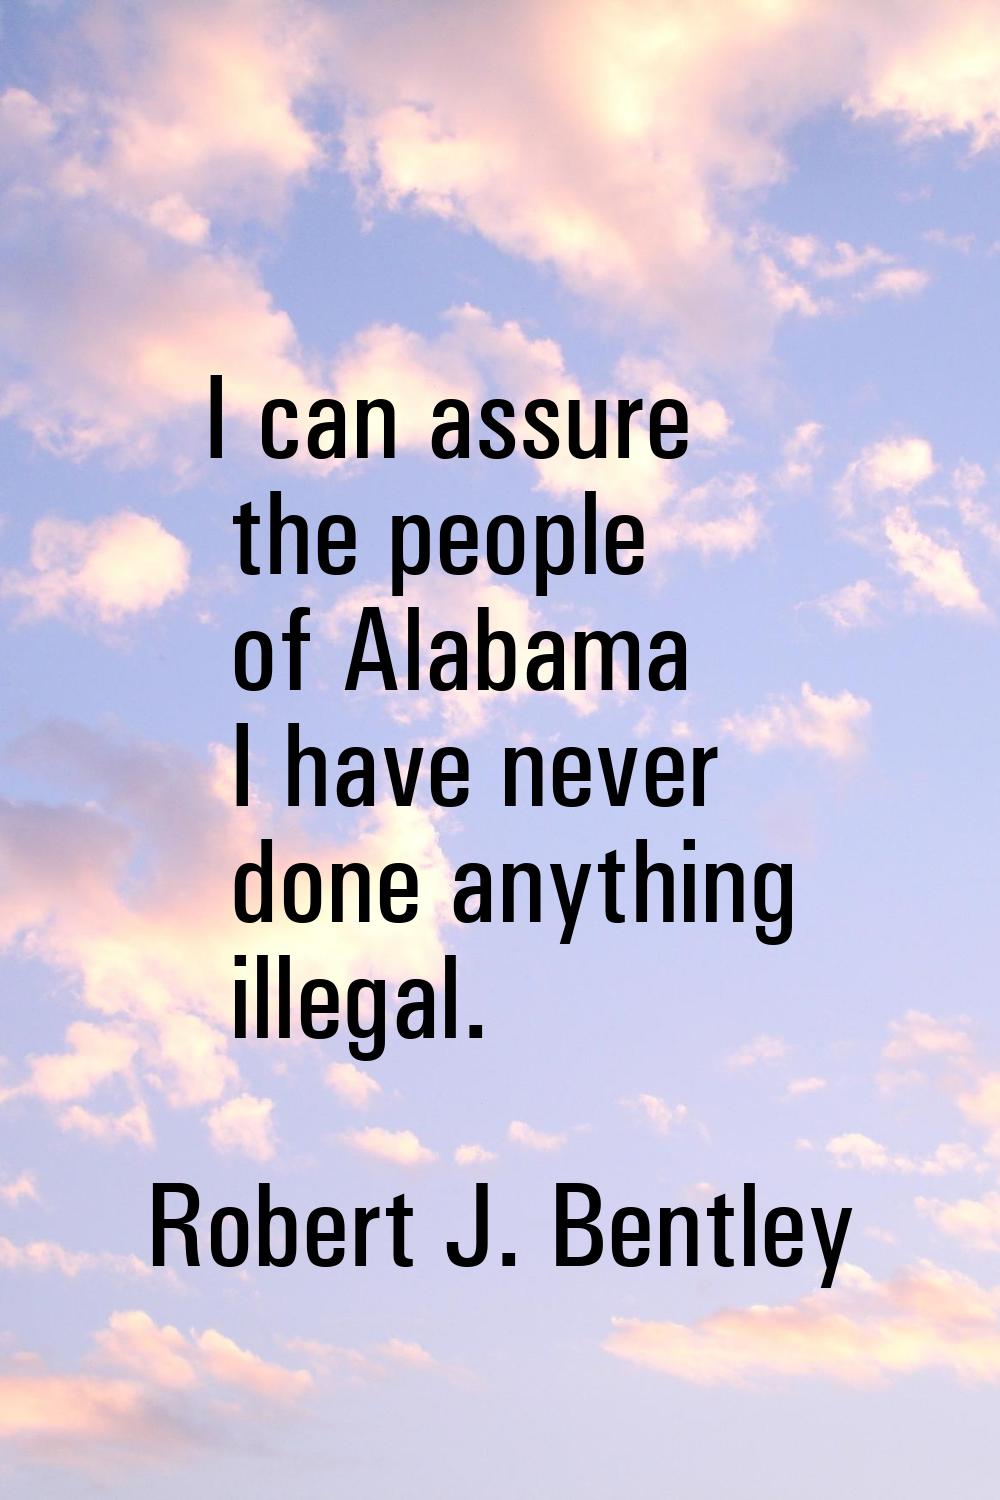 I can assure the people of Alabama I have never done anything illegal.